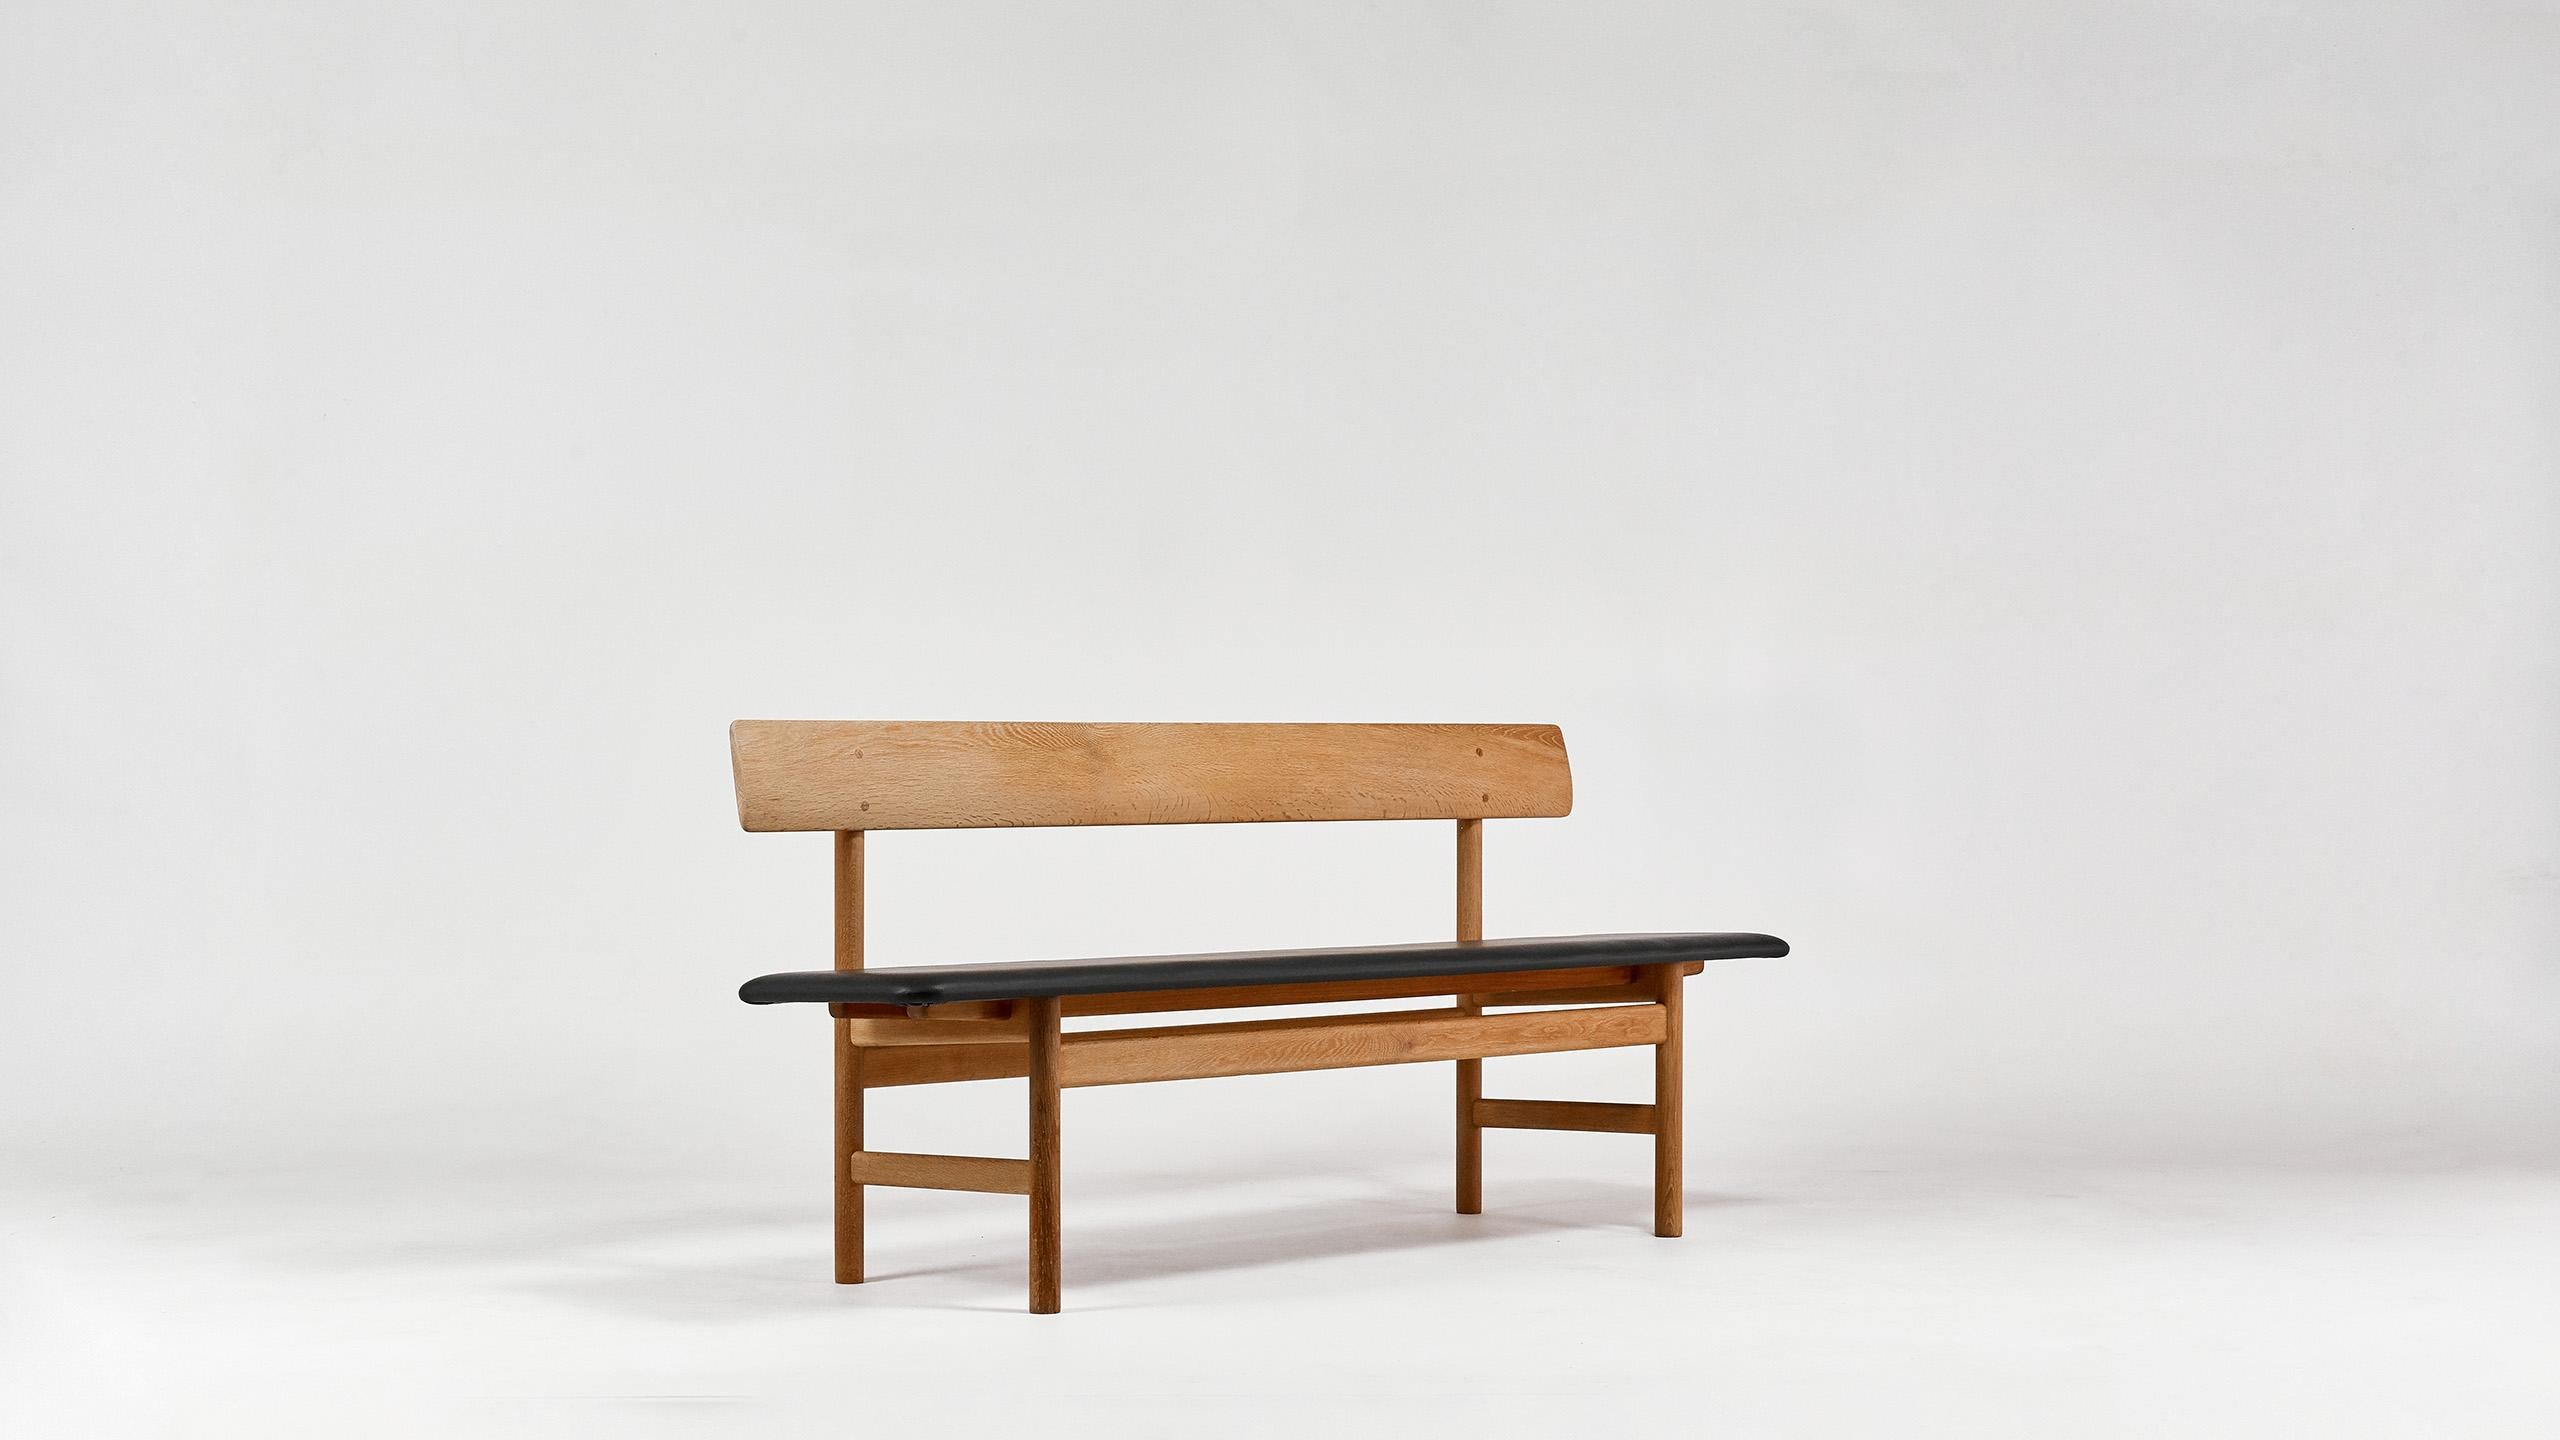 Bench model 3171, designed in 1956 by Børge Mogensen for Fredericia Møbelfabrik.

Waxed oak structure, seat reupholstered with high quality aniline black leather. 

Small traces of use, very good condition, circa 1960.